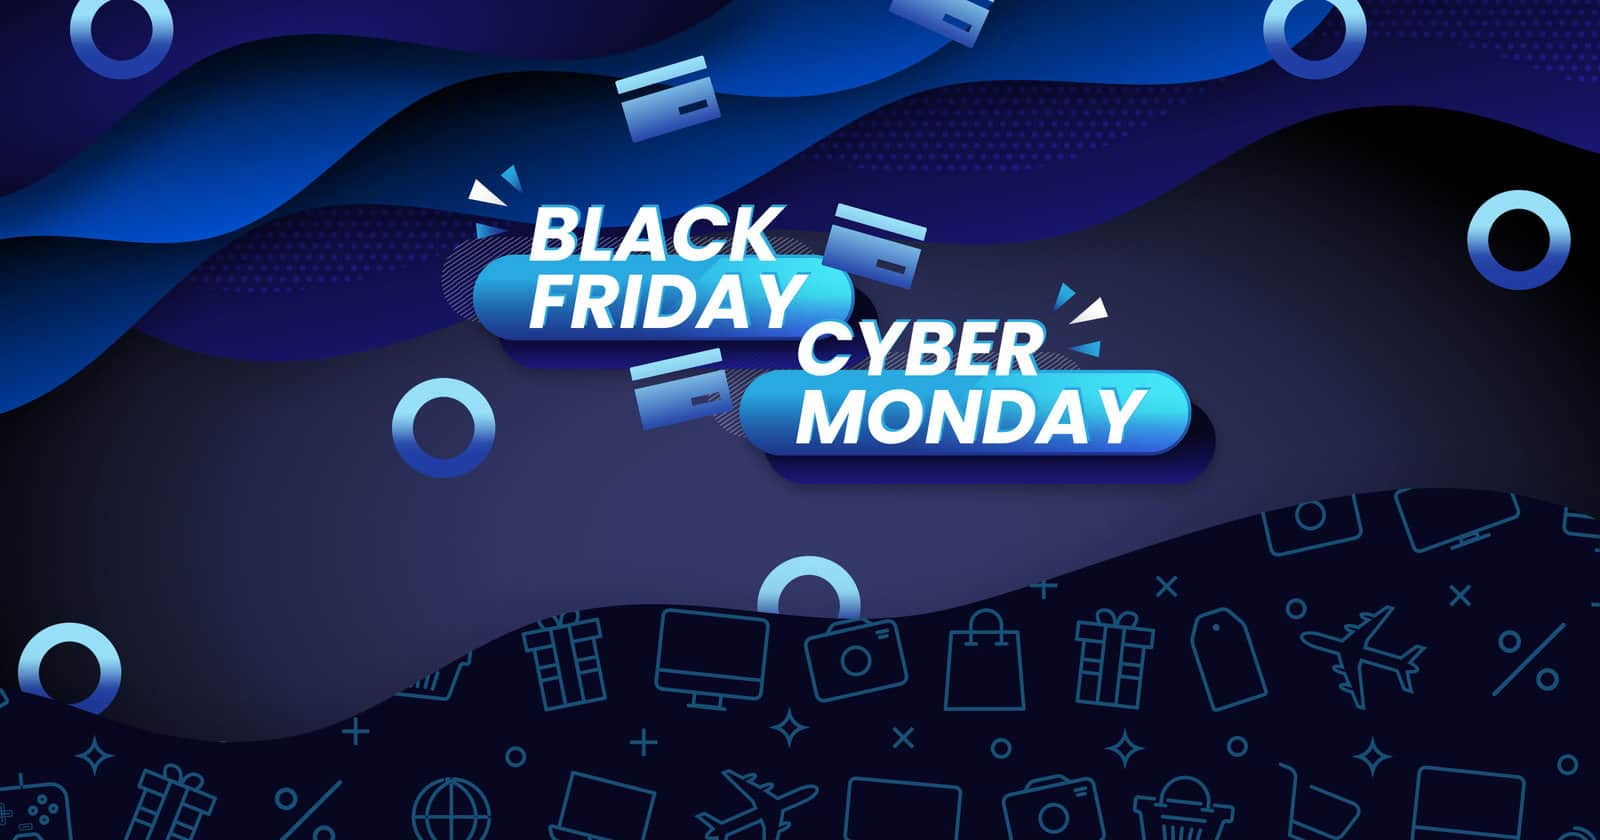 Apple Gift Card Early Black Friday 2021 Deals: 10% Back in Reward Points •  iPhone in Canada Blog